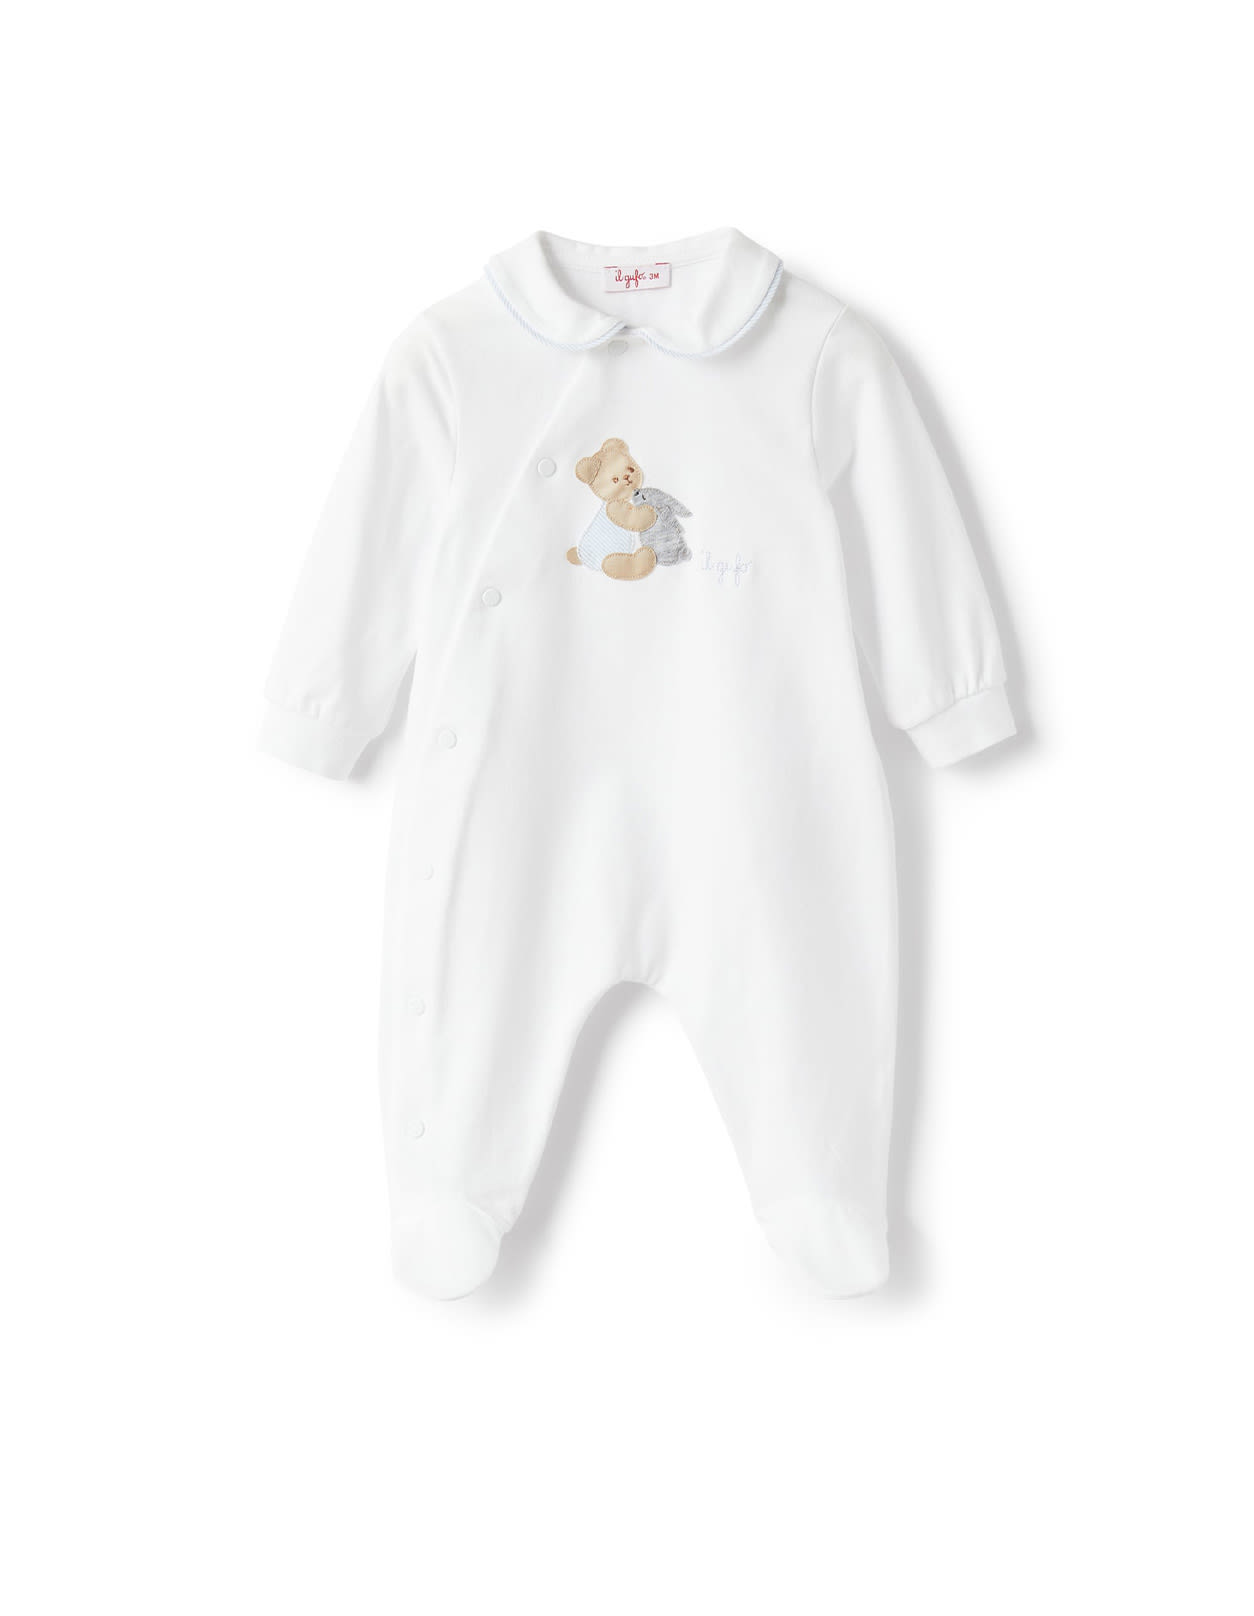 IL GUFO WHITE AND LIGHT BLUE SLEEPSUIT WITH TEDDY BEAR MOTIF